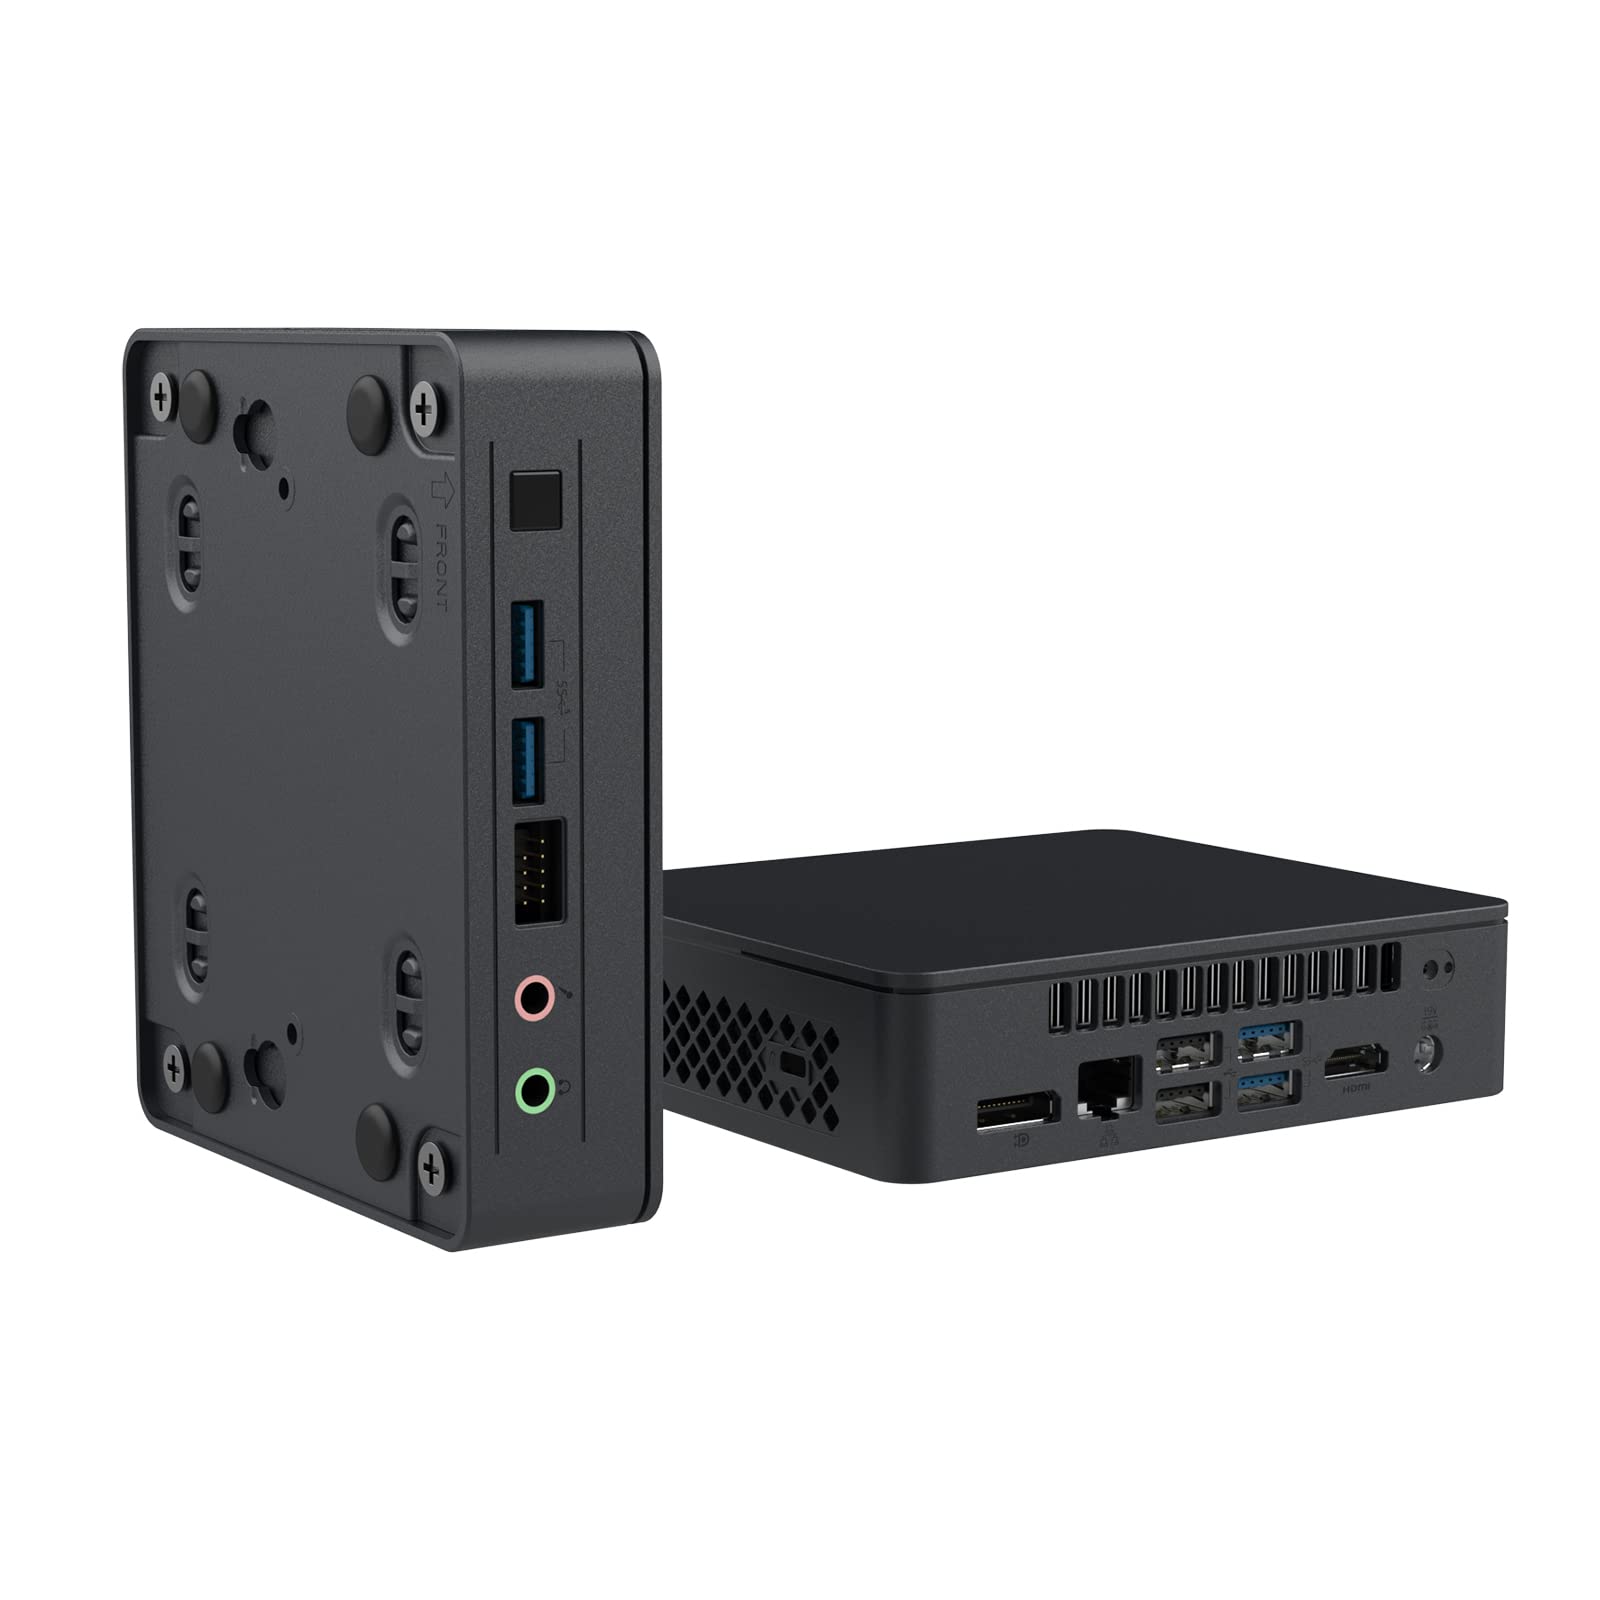 NUC 11 Essential Kit with extensive external interfaces